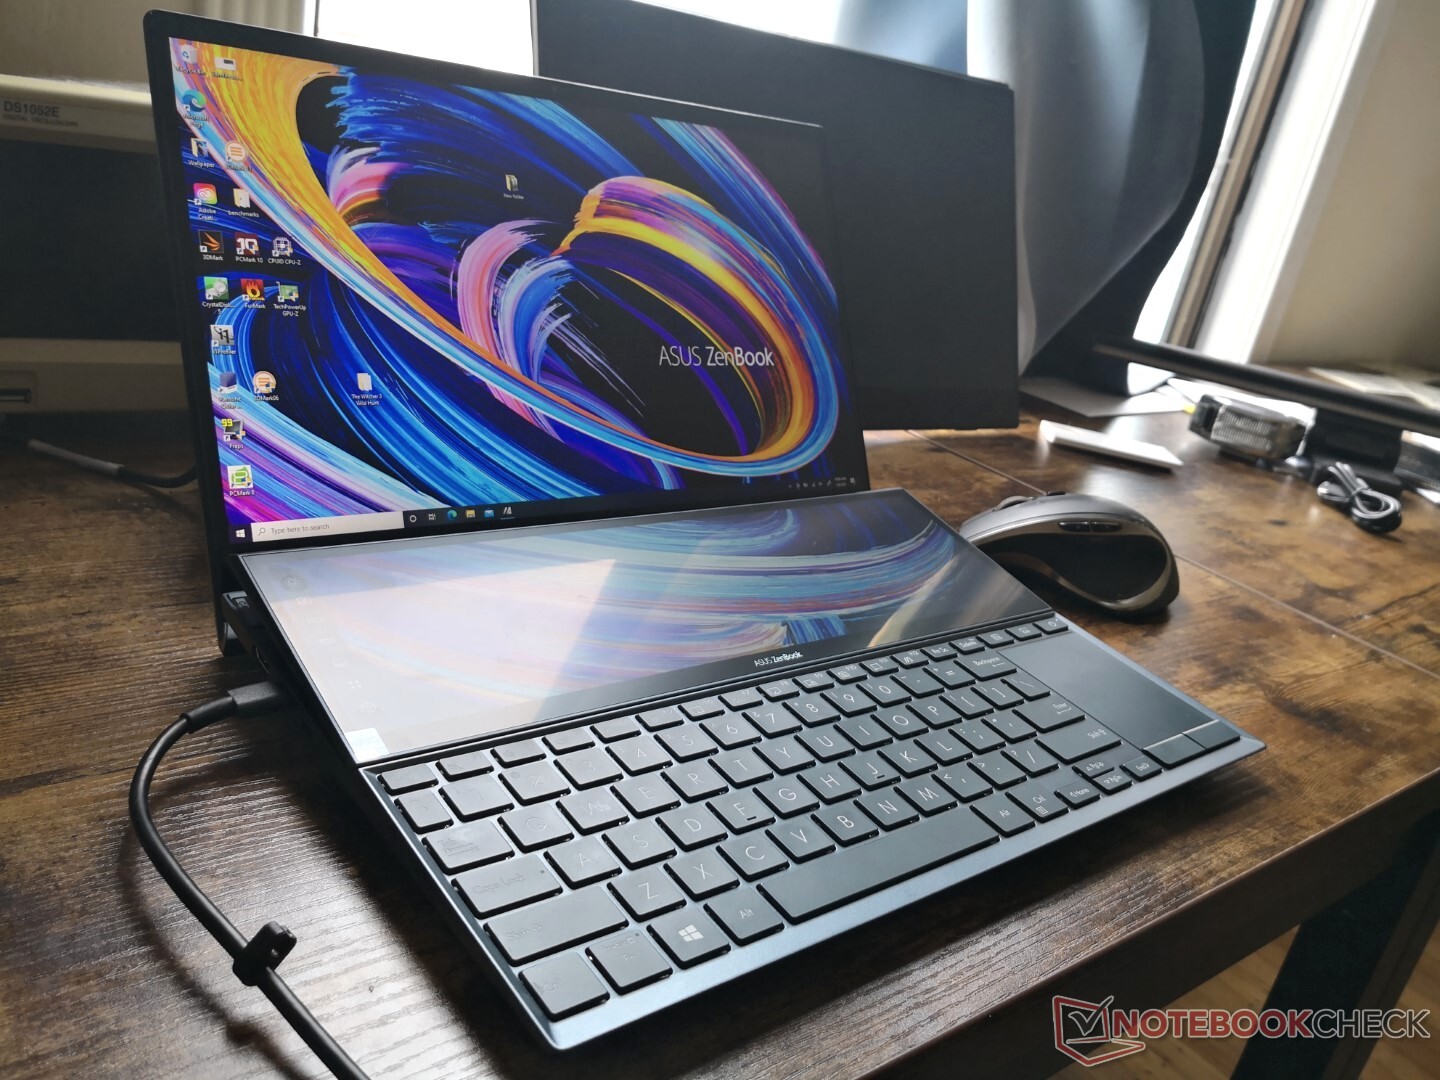 All Asus Zenbook laptops, no matter how expensive, have significantly  slower SD card readers than the Dell XPS or HP Spectre   News